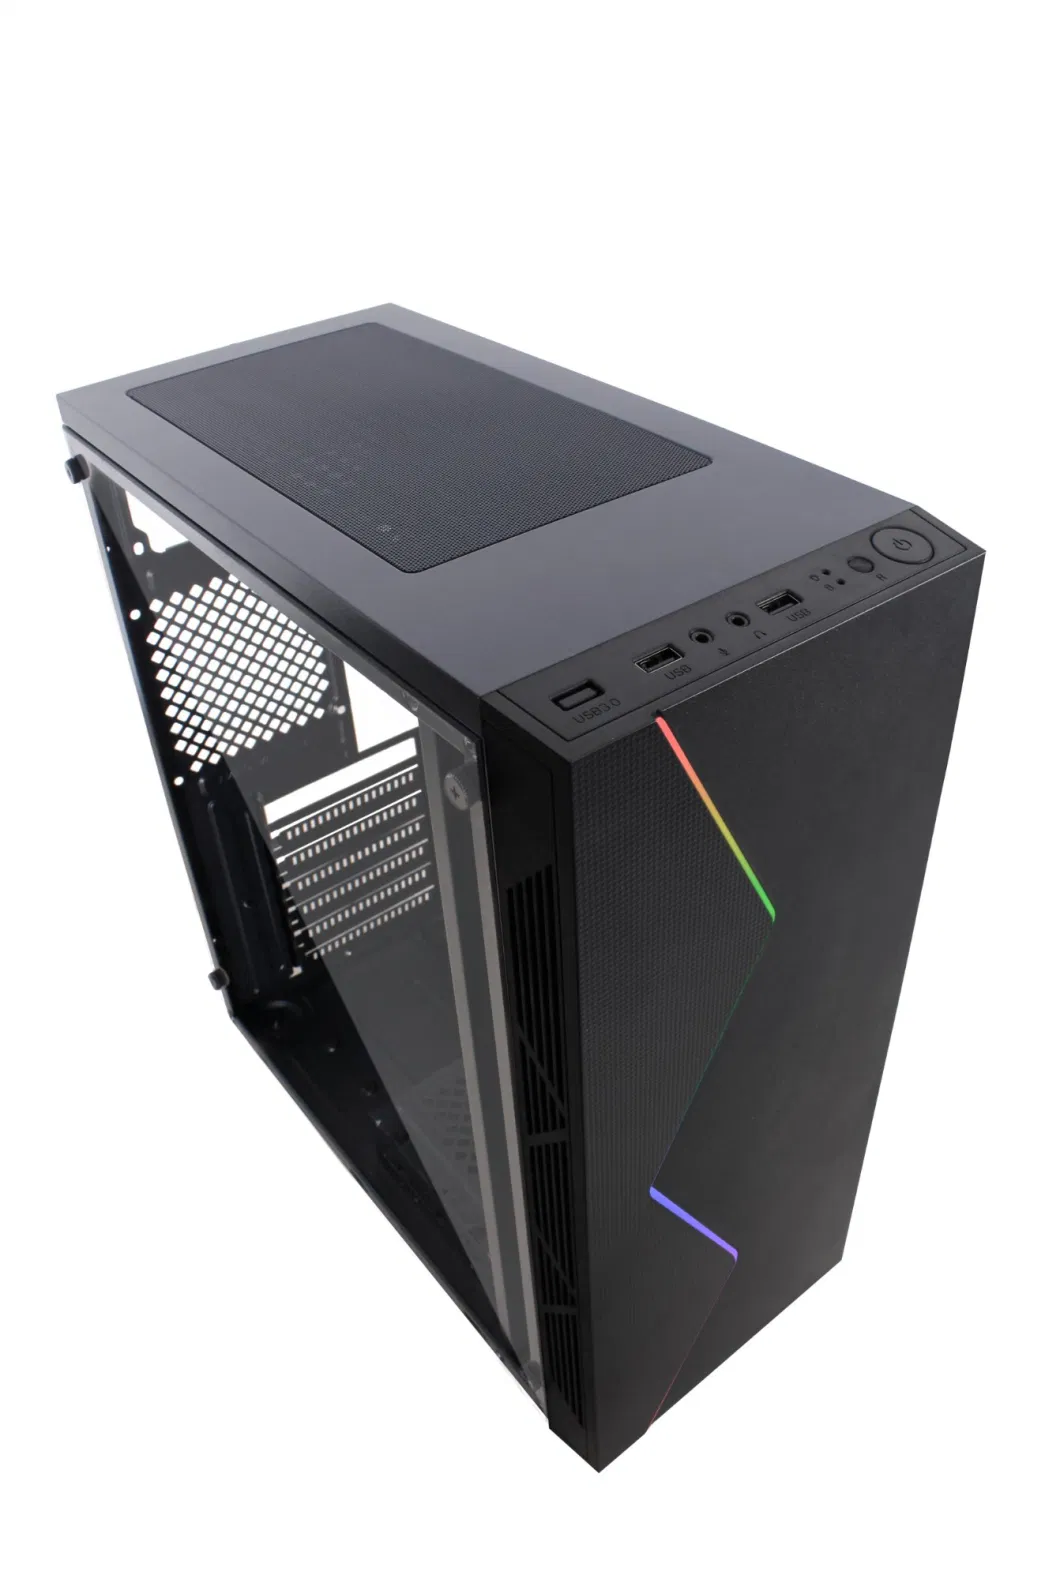 Special Design Tower PC Case ATX Computer Case with LED Strip